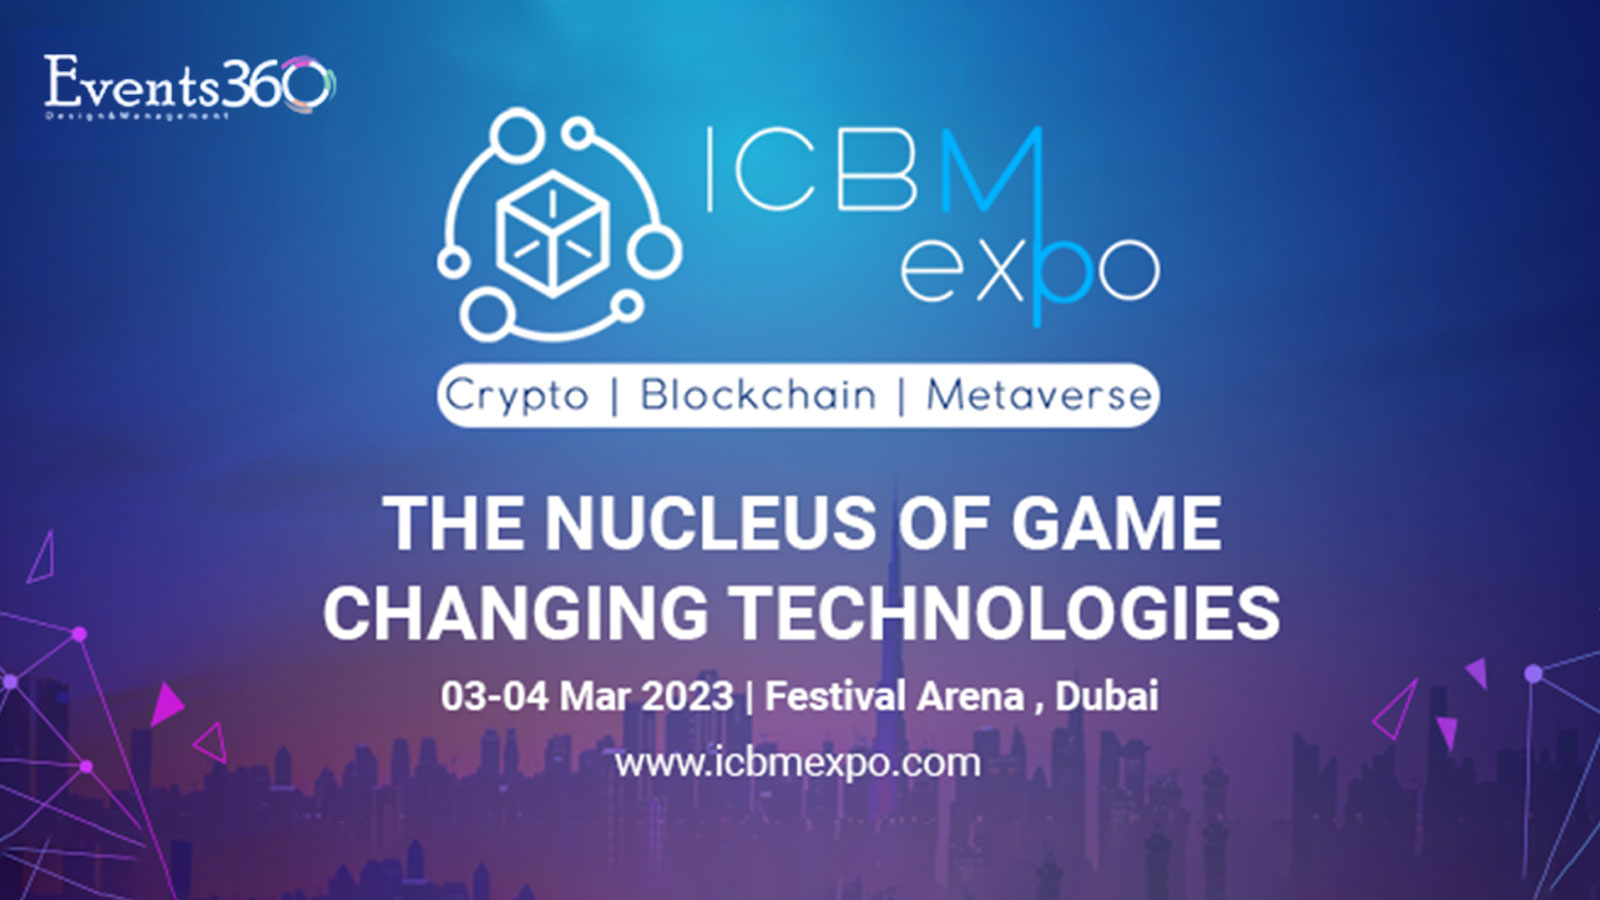 ICBM Expo - The Nucleus of Game Changing Technologies